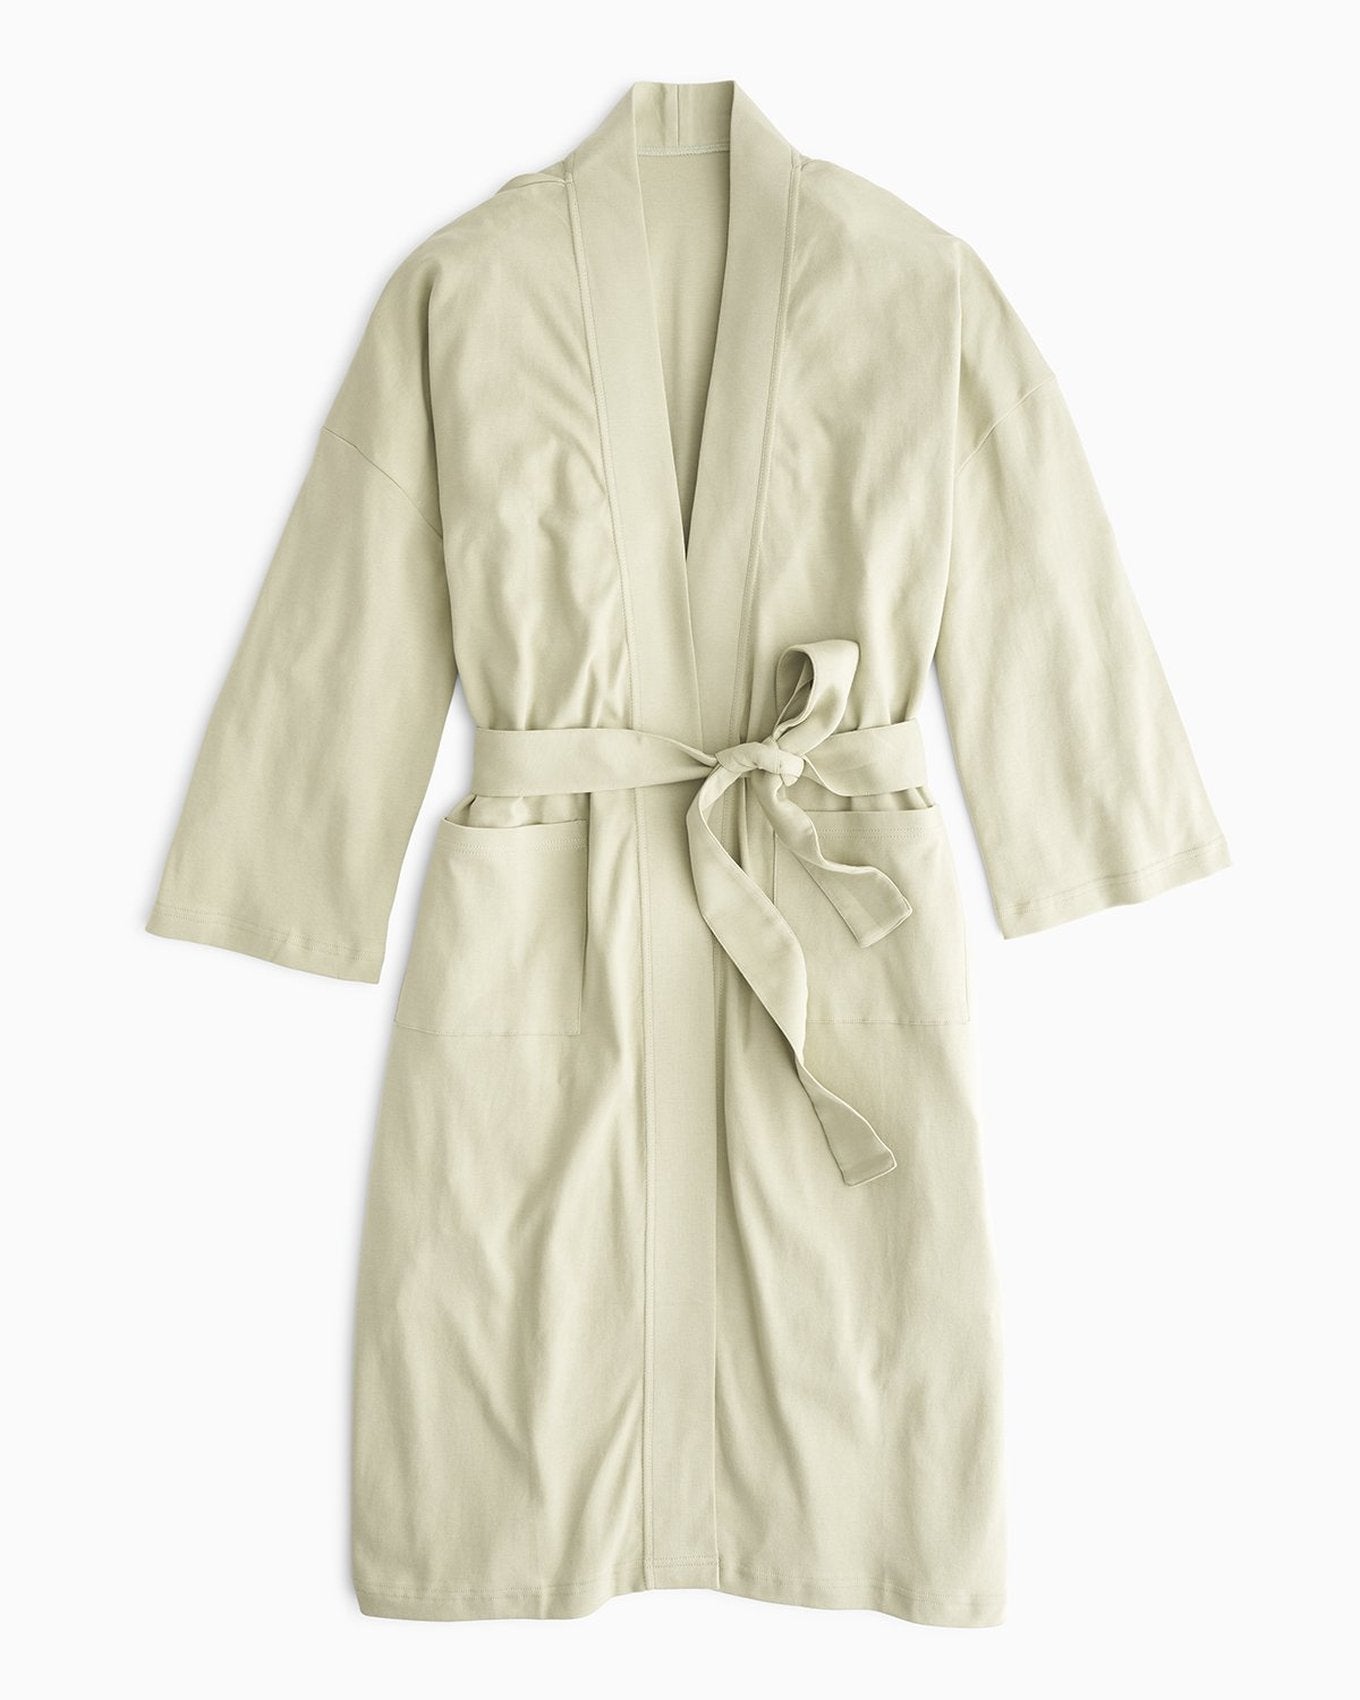 YesAnd Organic Knit Robe Knit Robe in color Tea and shape robe